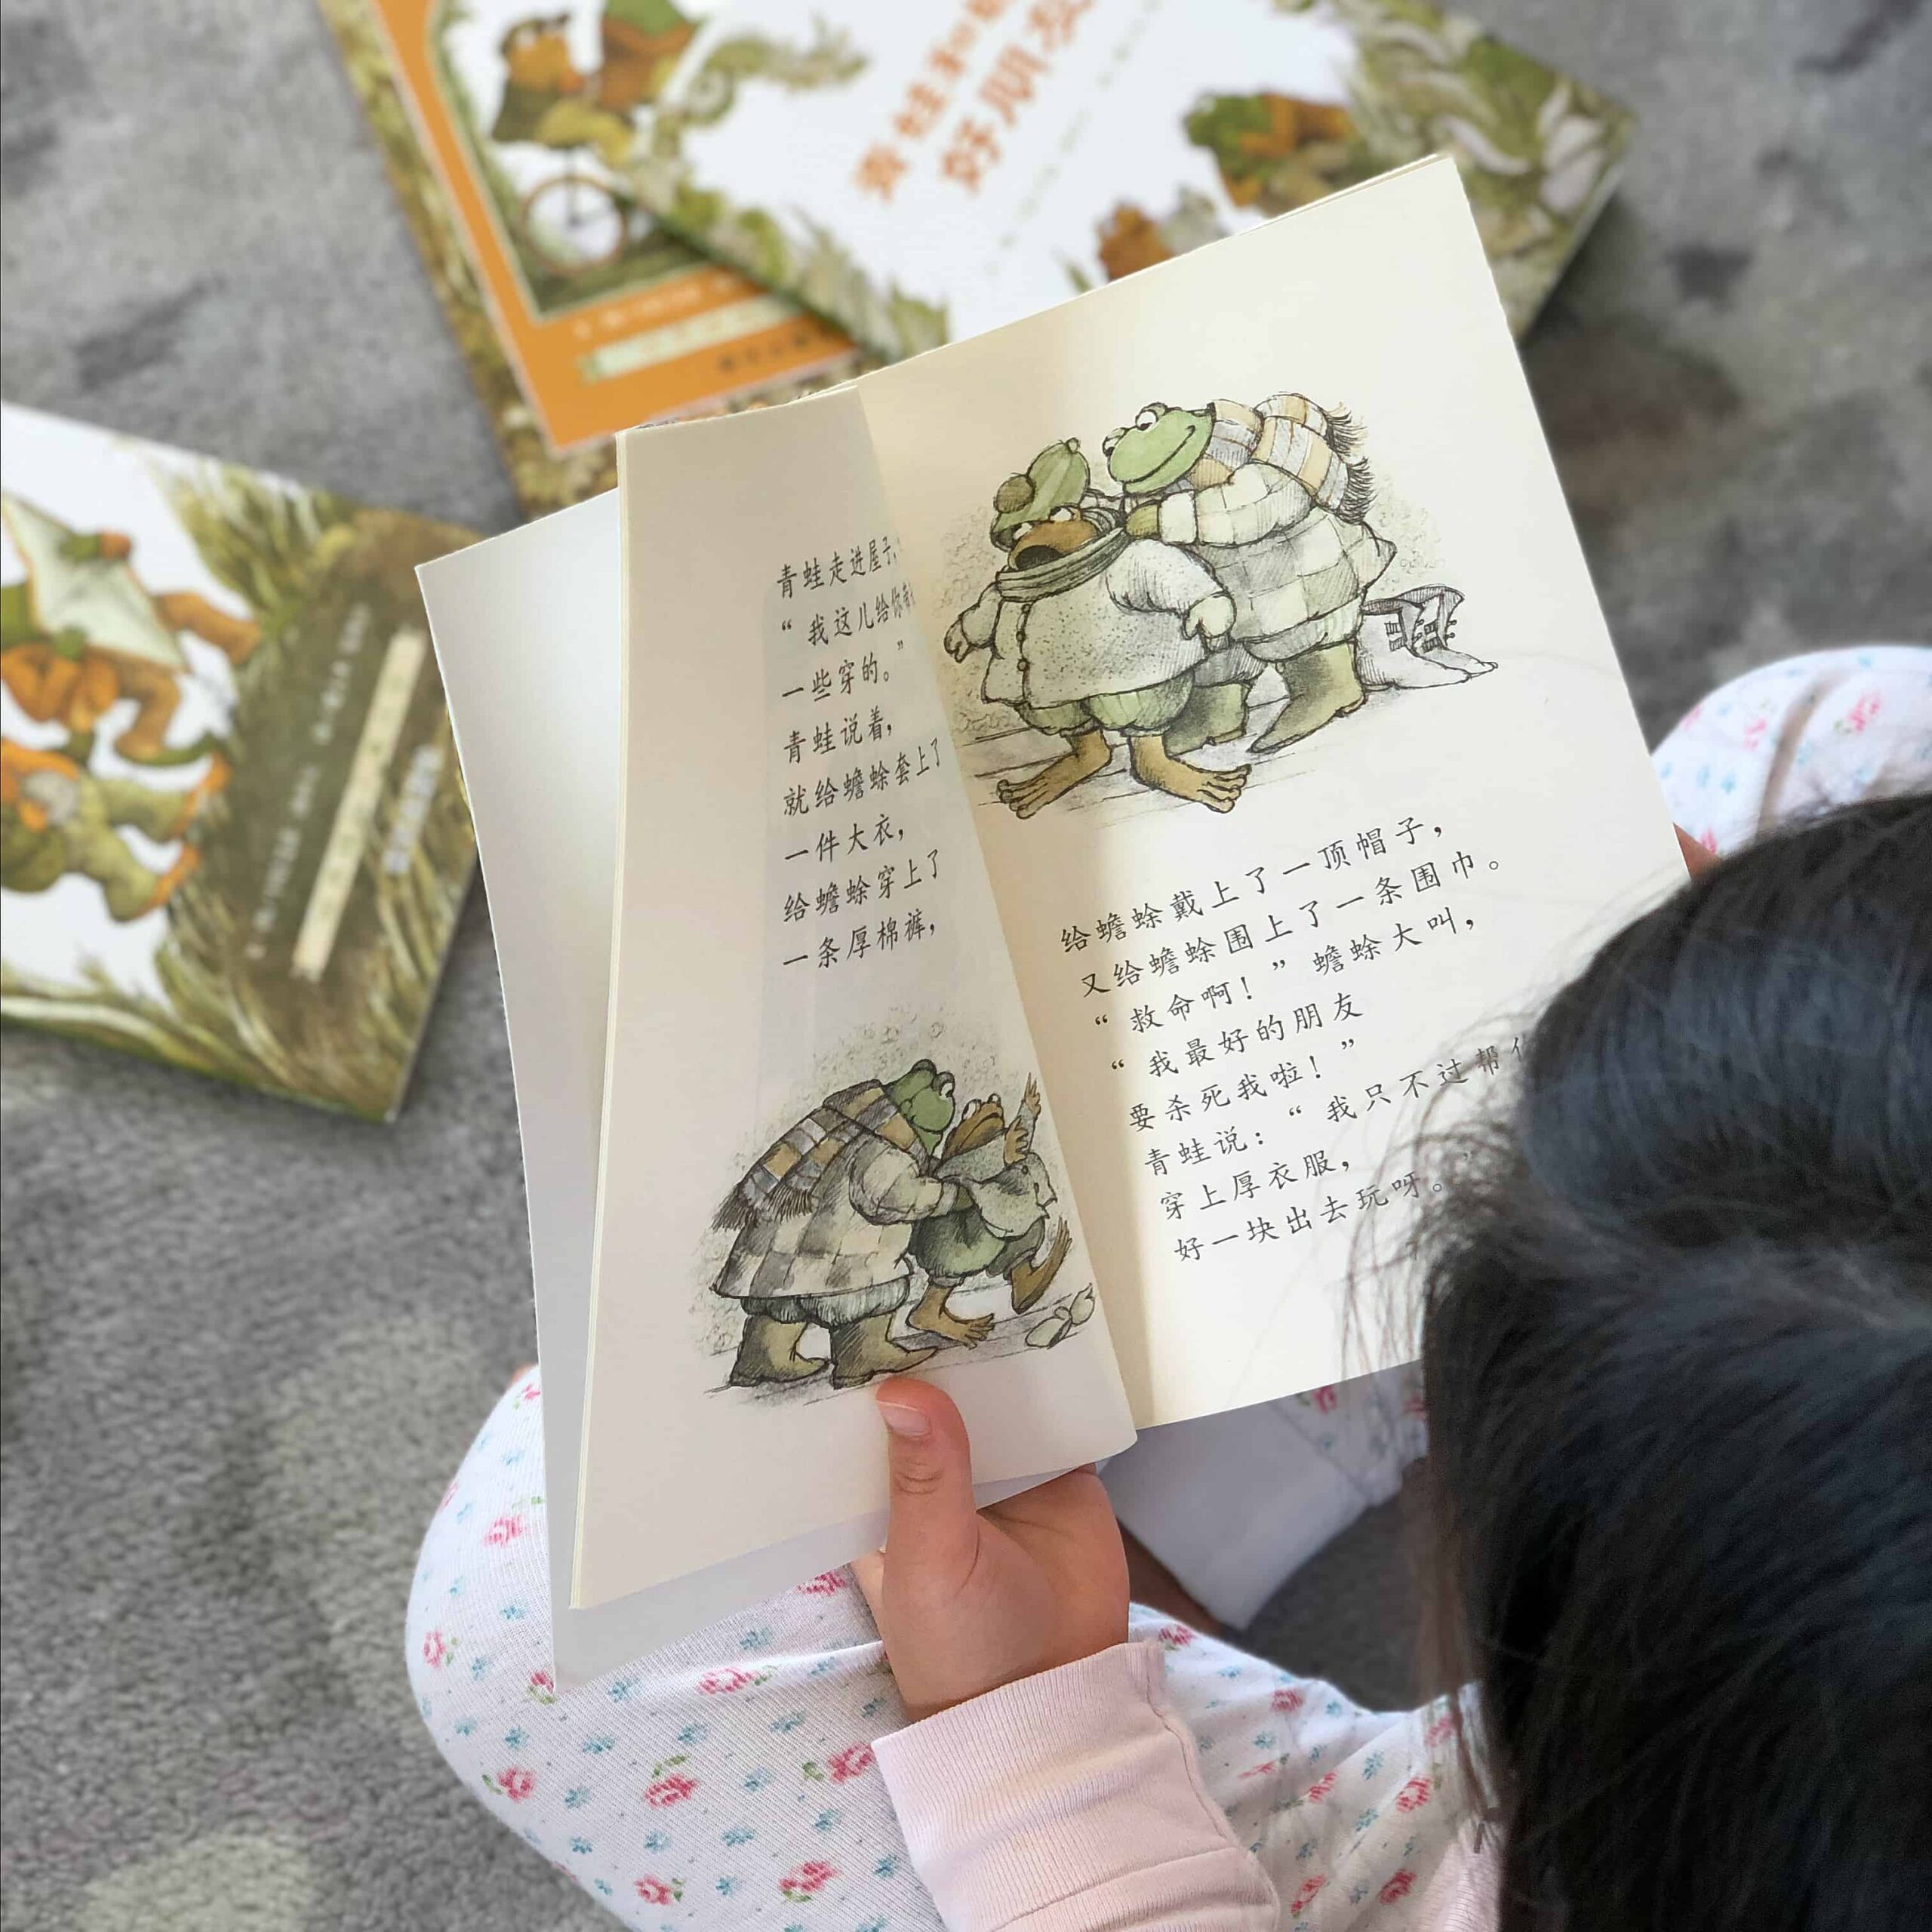 Frog and Toad Books Chinese Bridge Books Review 青蛙和蟾蜍